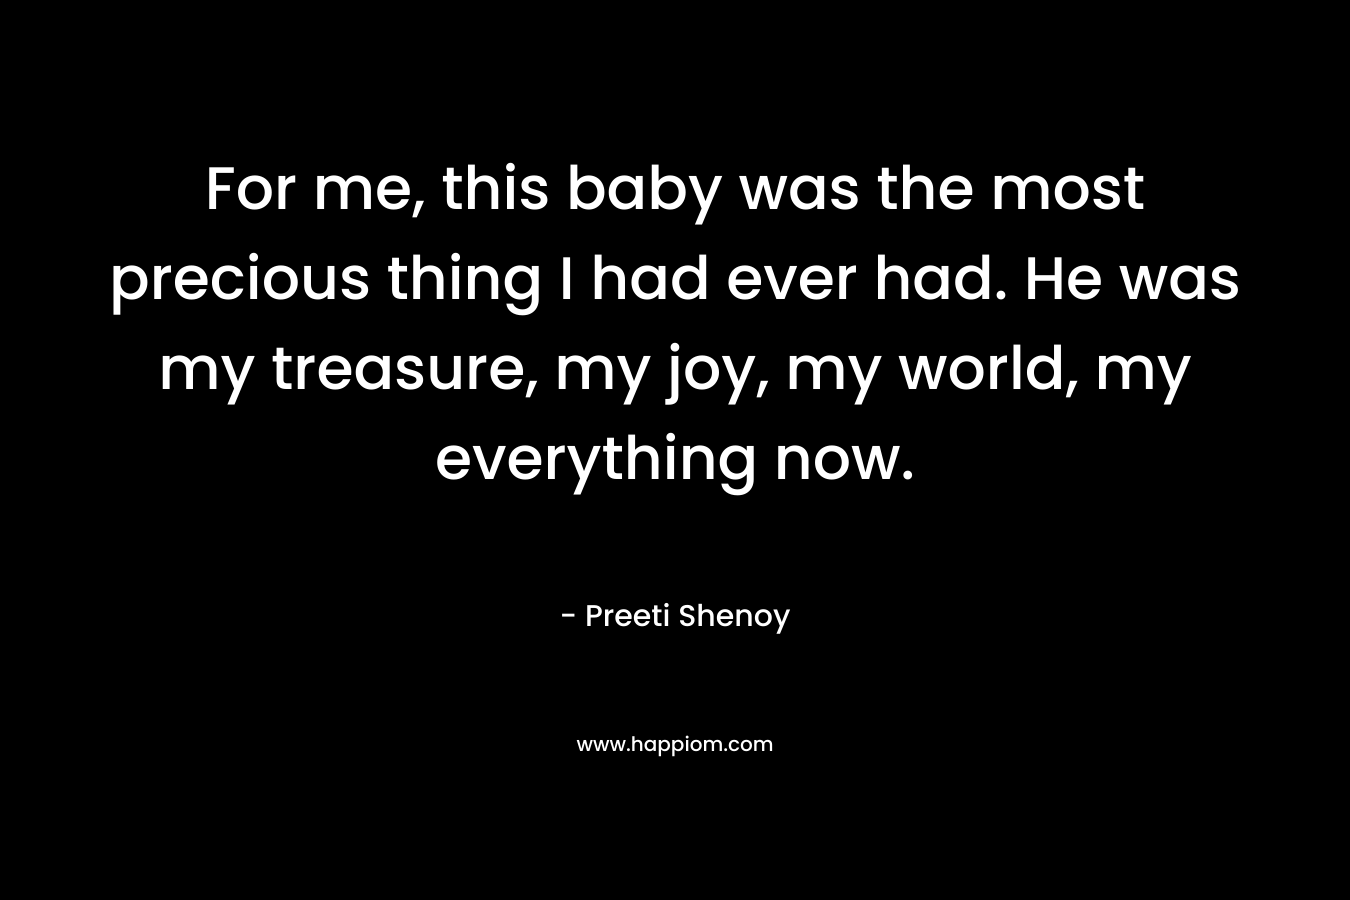 For me, this baby was the most precious thing I had ever had. He was my treasure, my joy, my world, my everything now. – Preeti Shenoy